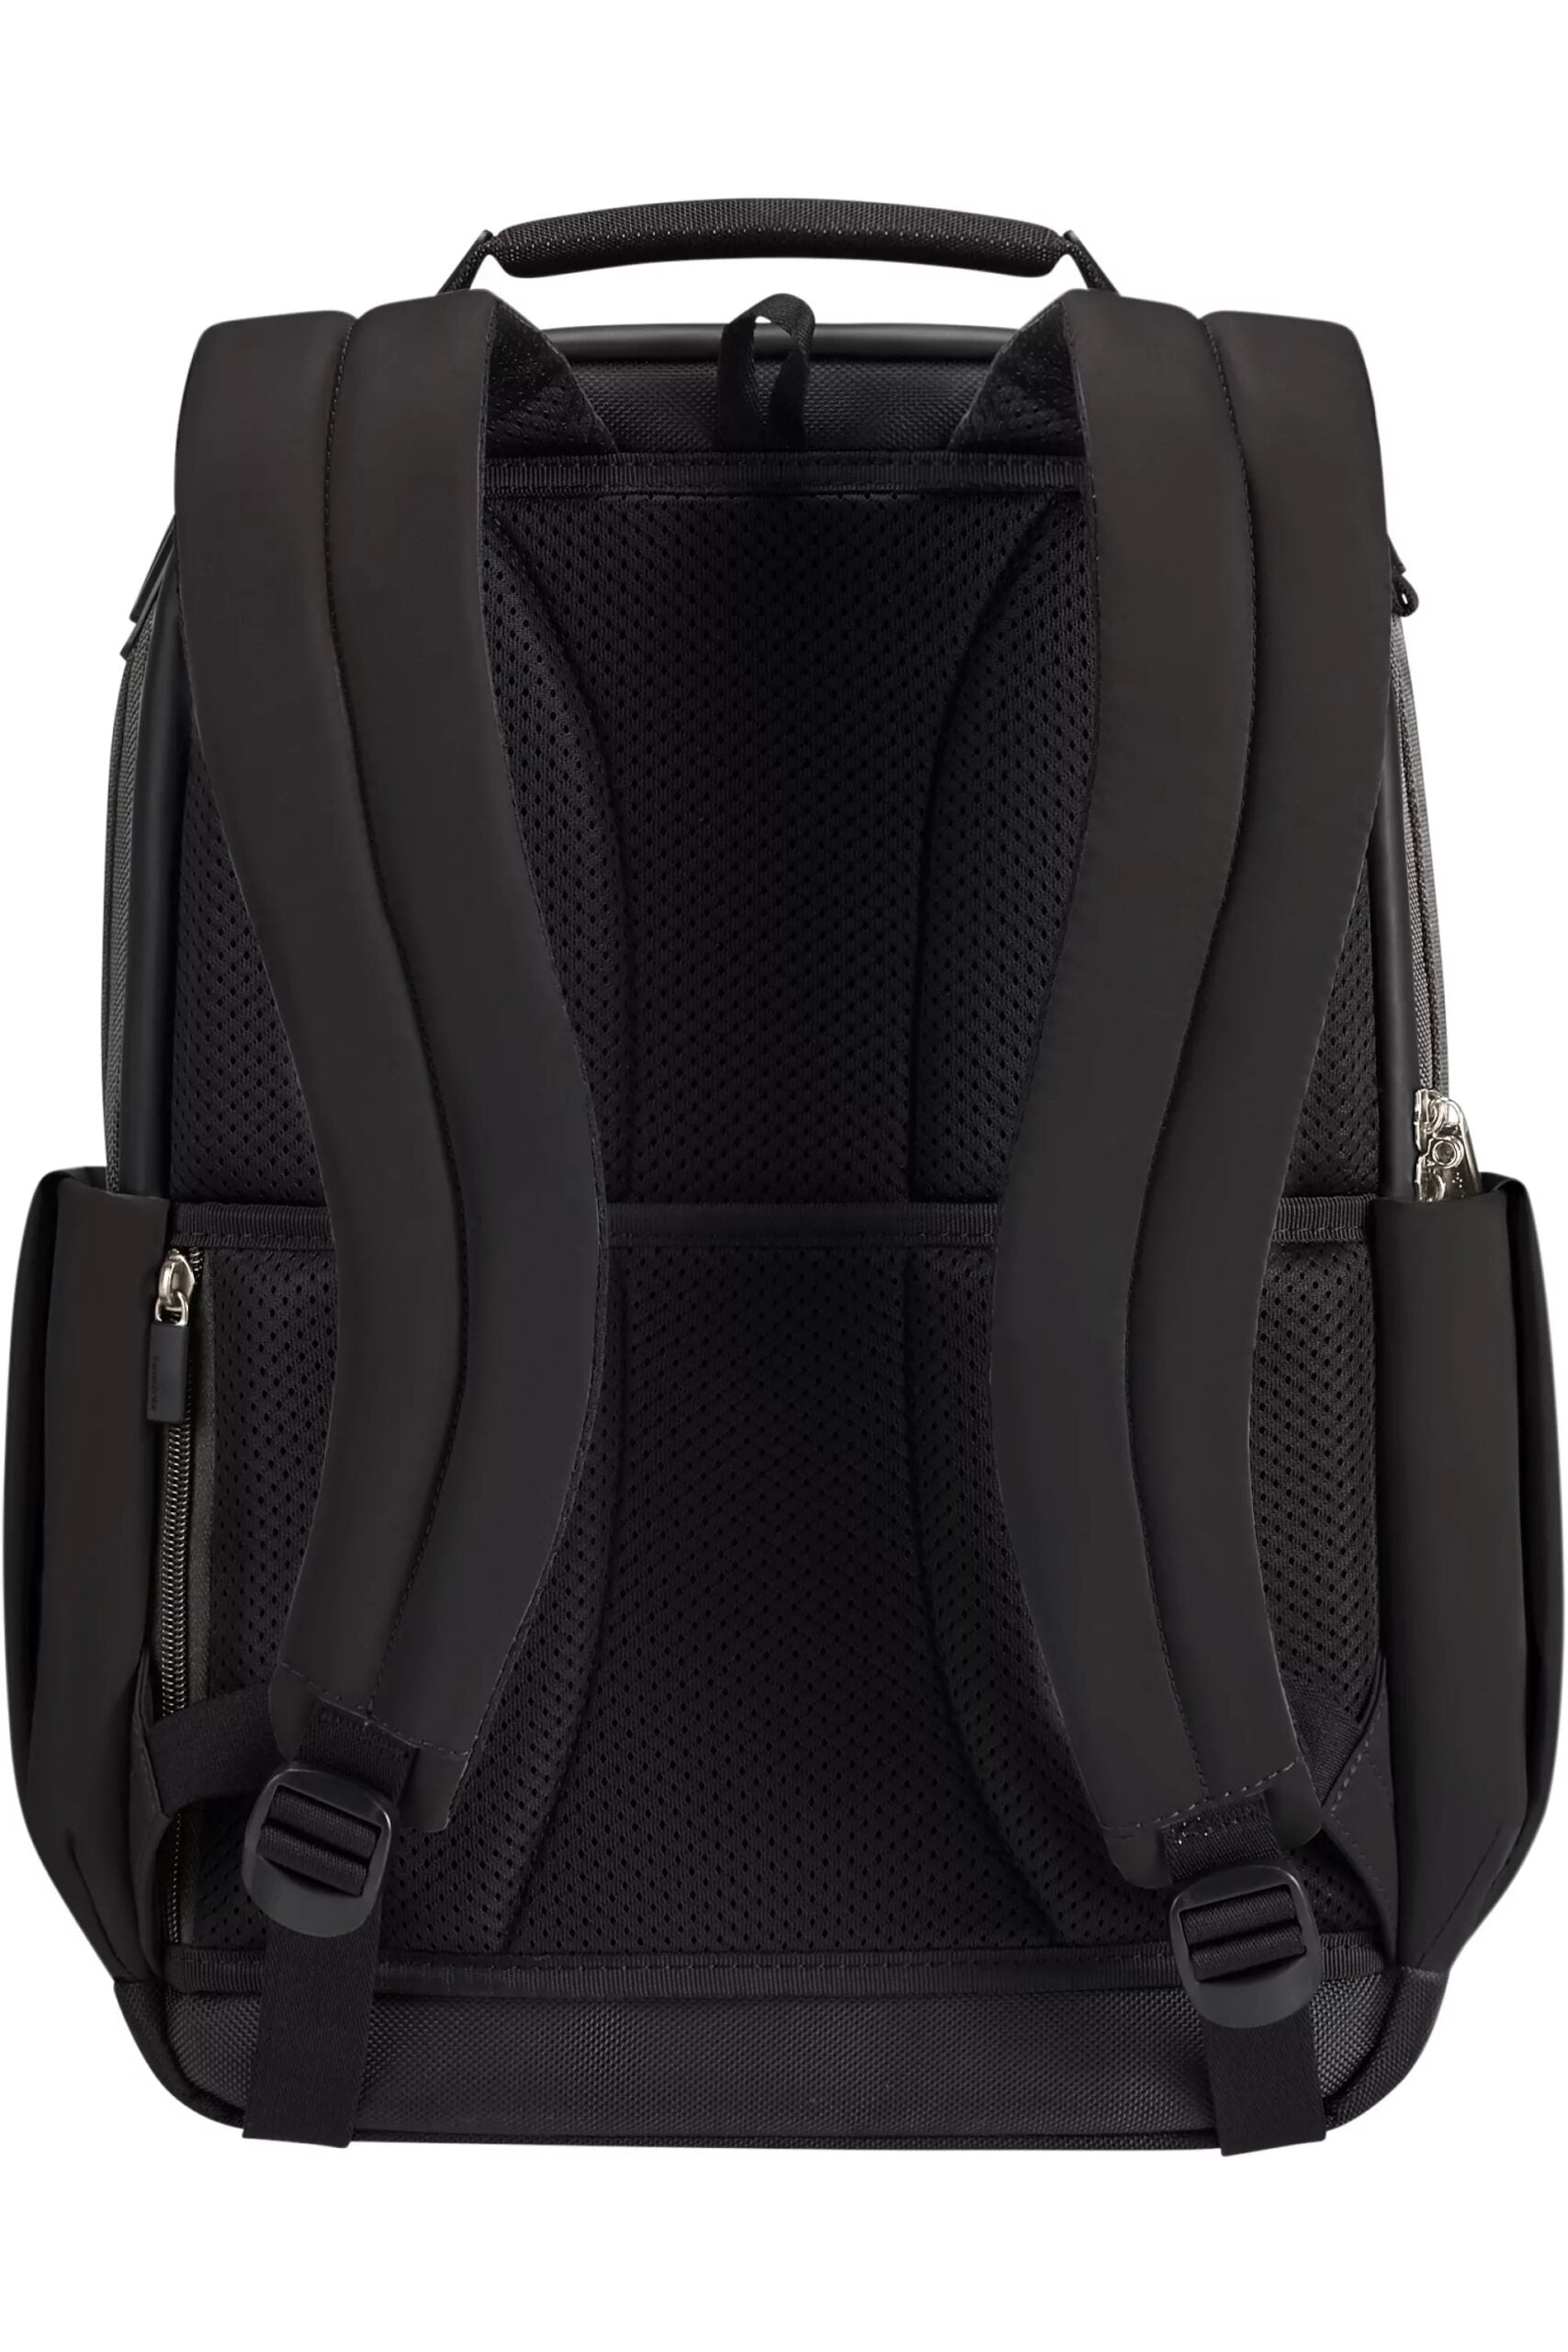 Openroad backpack 14.1 4